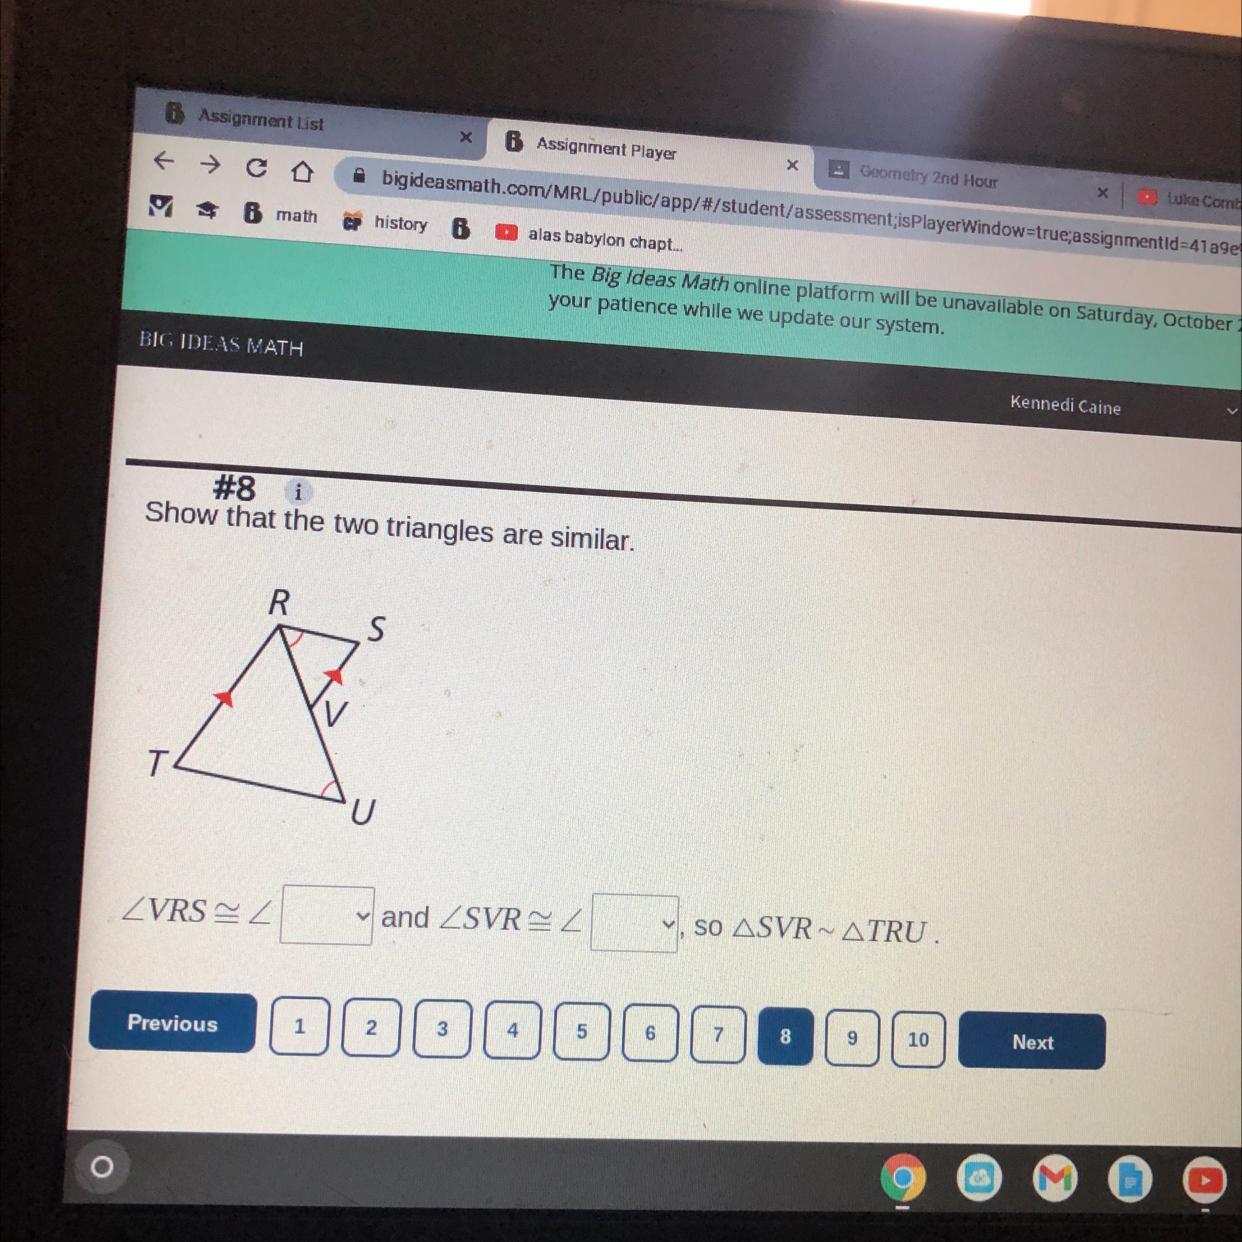 Im So Confused Can Someone Help Me Solve This Step By Step?